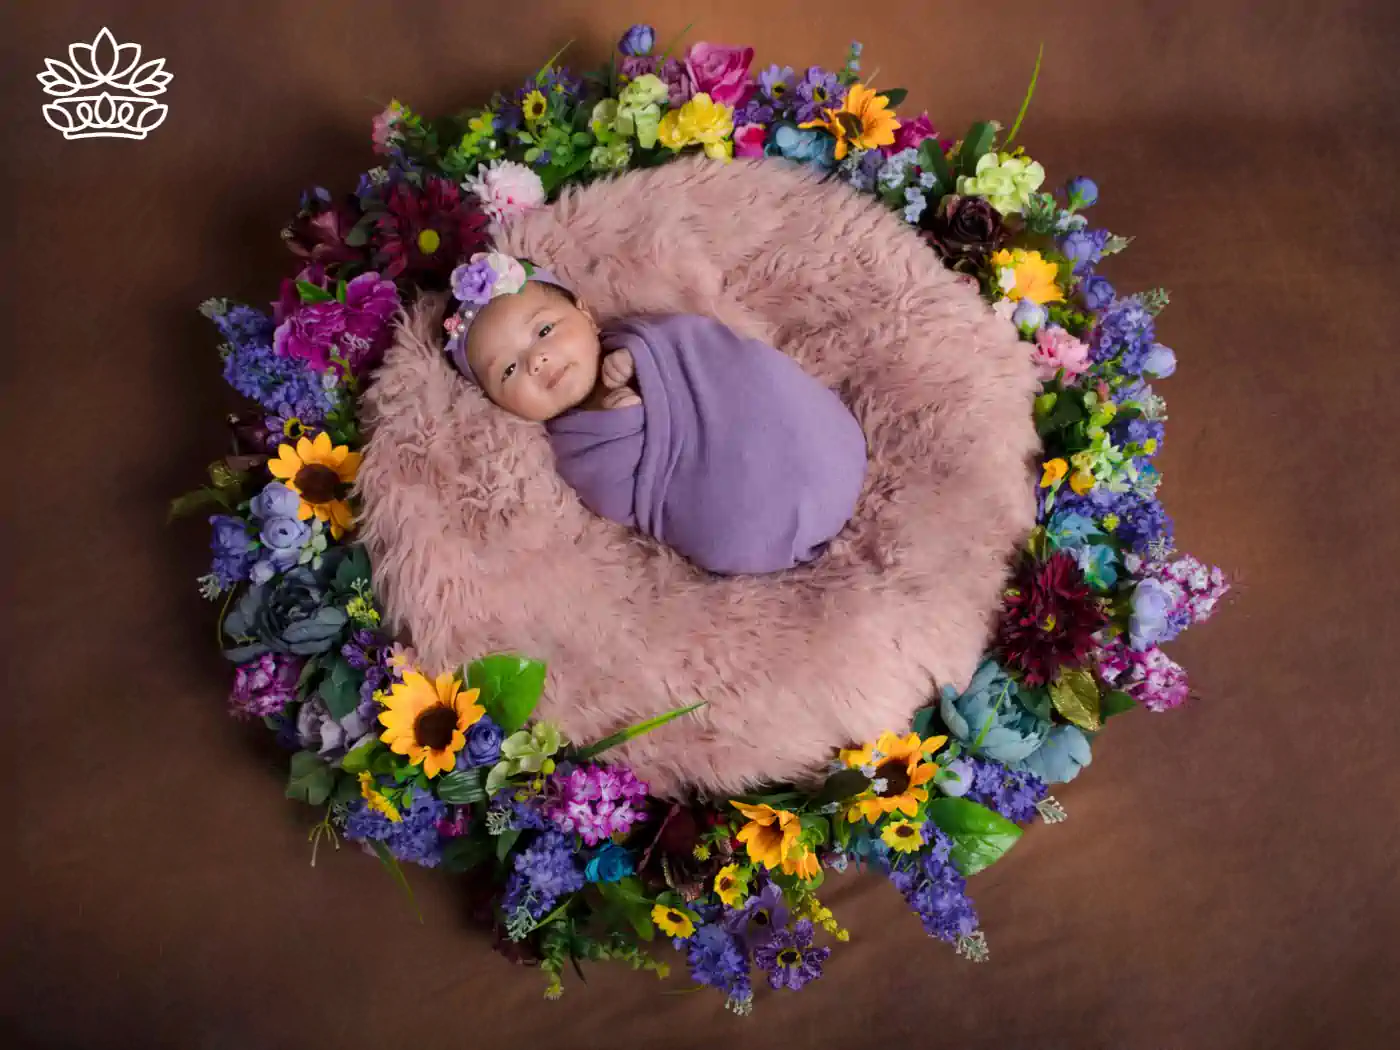 Newborn baby wrapped in a purple blanket surrounded by a floral wreath. Fabulous Flowers and Gifts. New Baby Flowers British English.